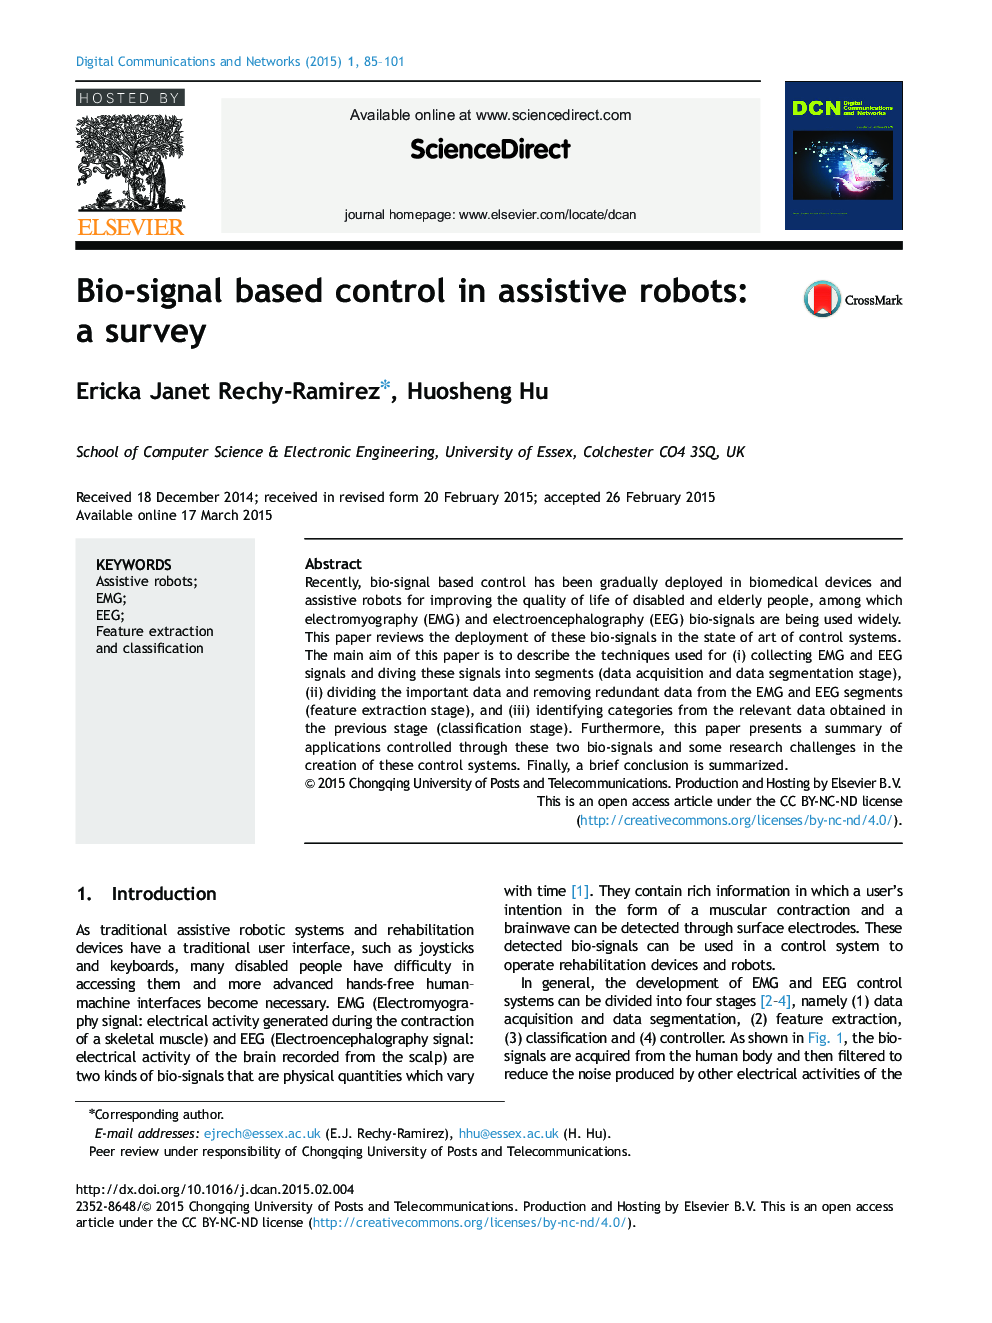 Bio-signal based control in assistive robots: a survey 